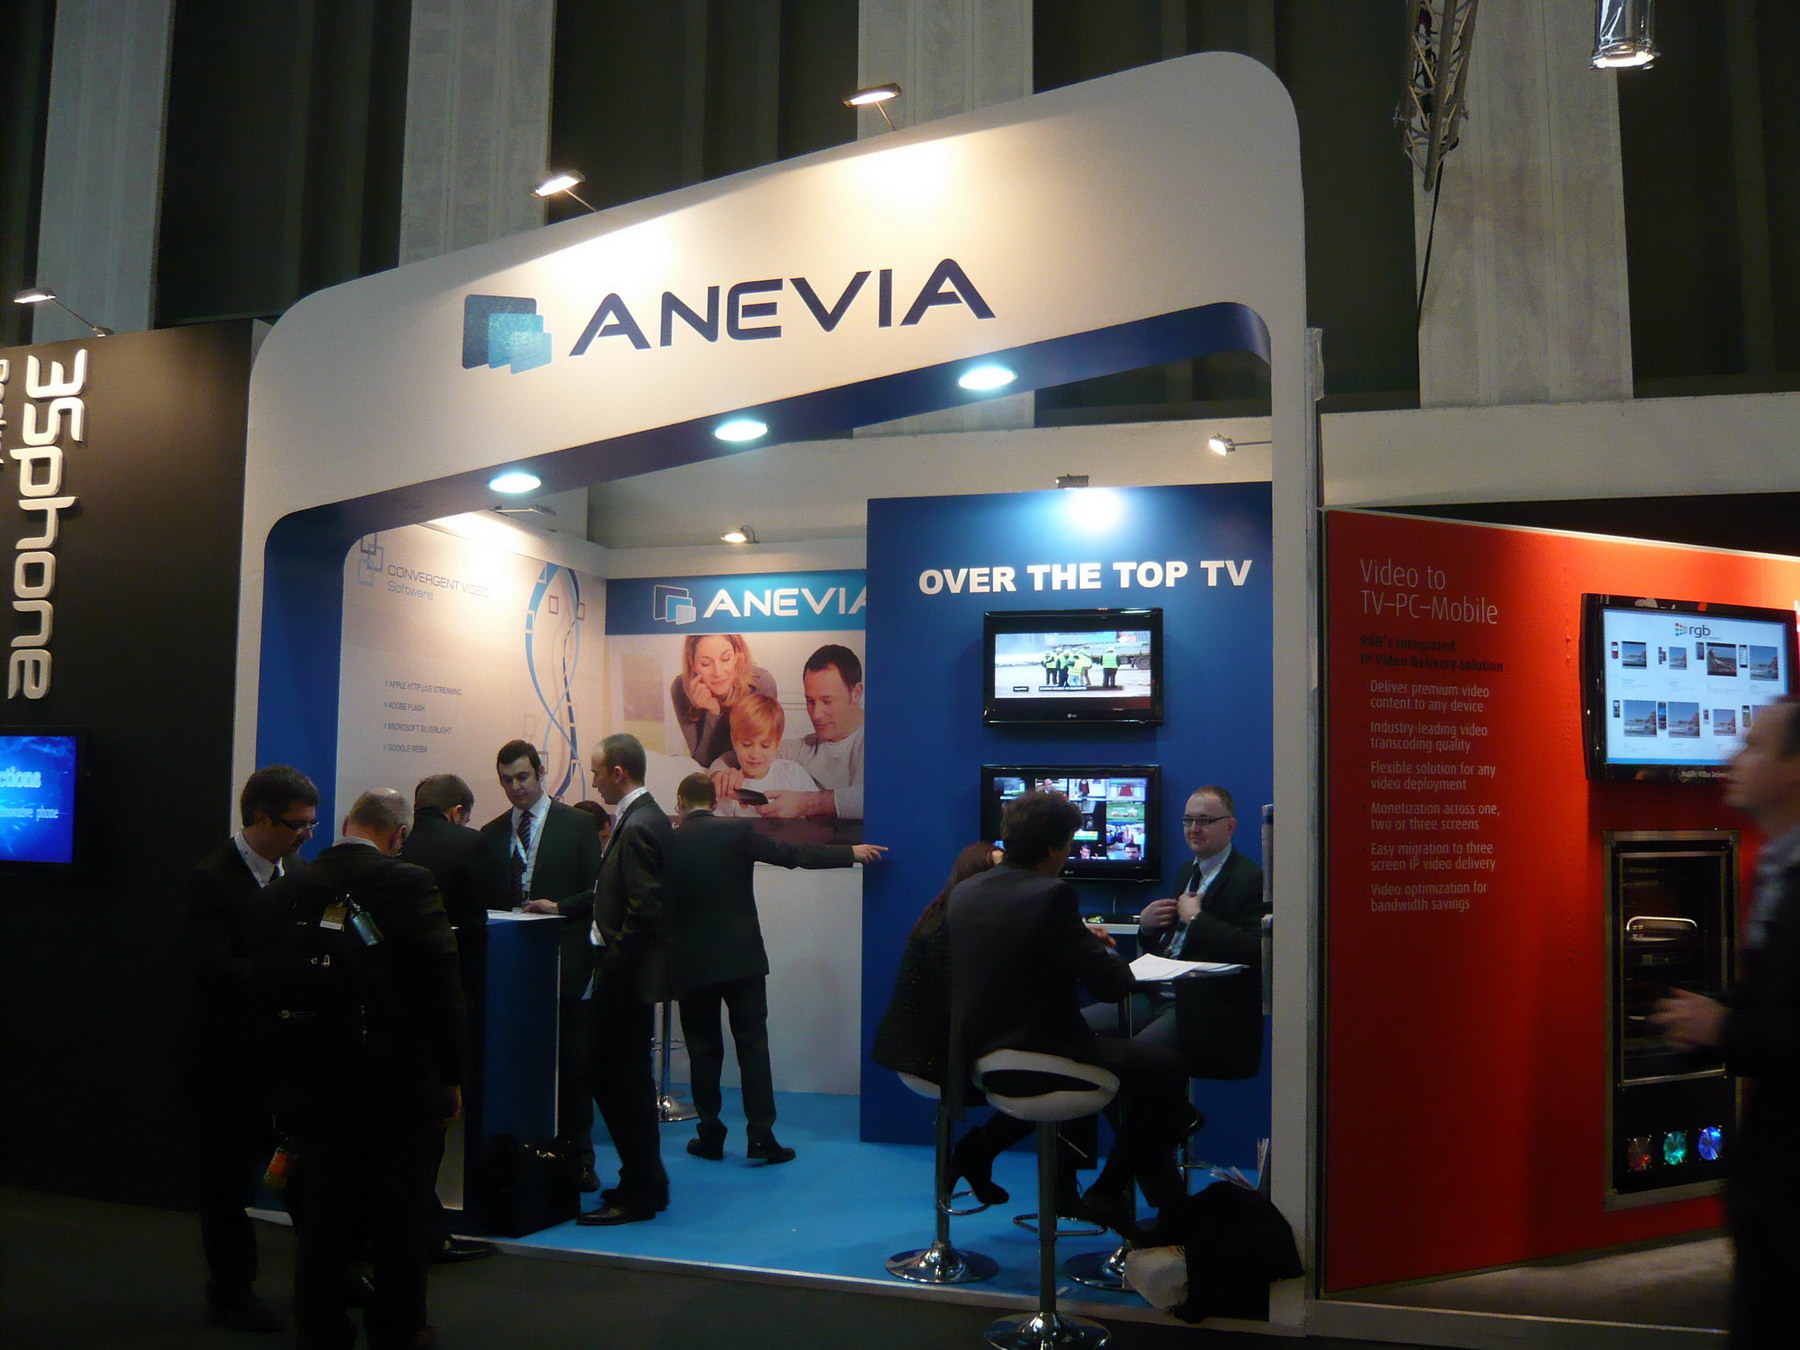 stand ANEVIA at MOBILE WORLD CONGRESS BARCELONA